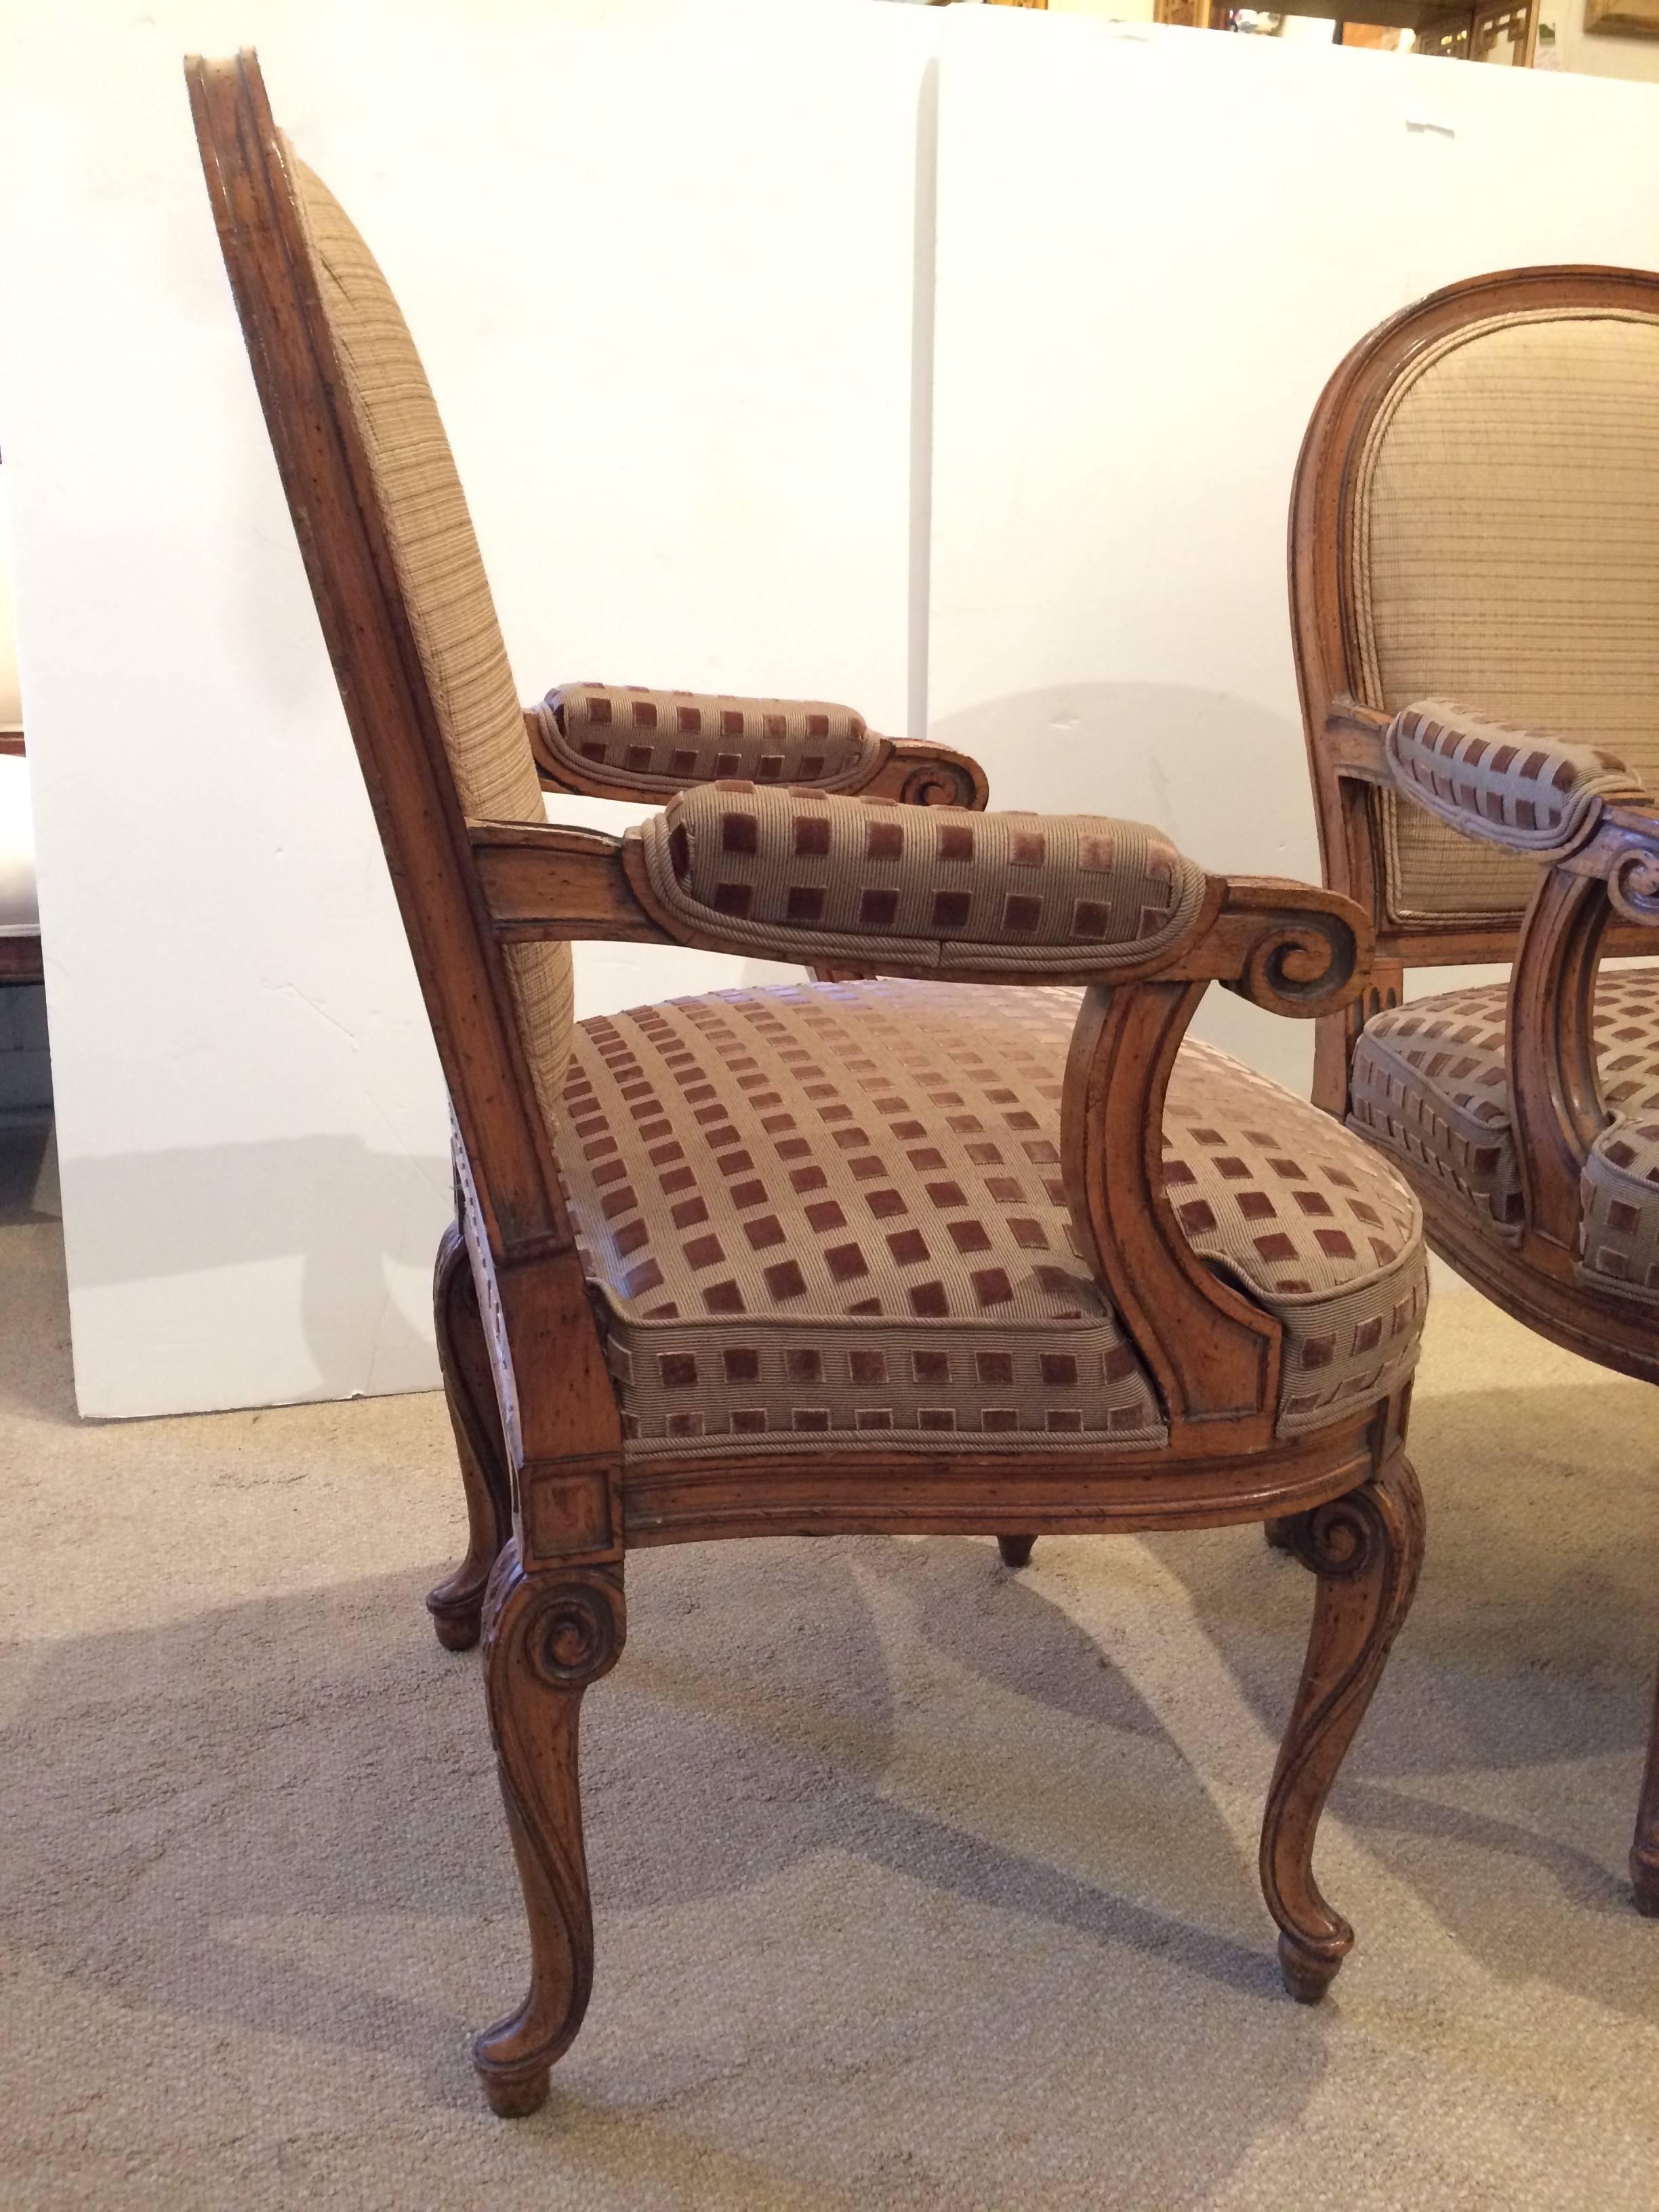 Two handsome carved walnut armchairs with cabriole legs and comfortable roomy seats and backs, imaginatively upholstered with two complimentary aubergine and khaki cut velvet fabrics on the front, and a striped silk on the back.